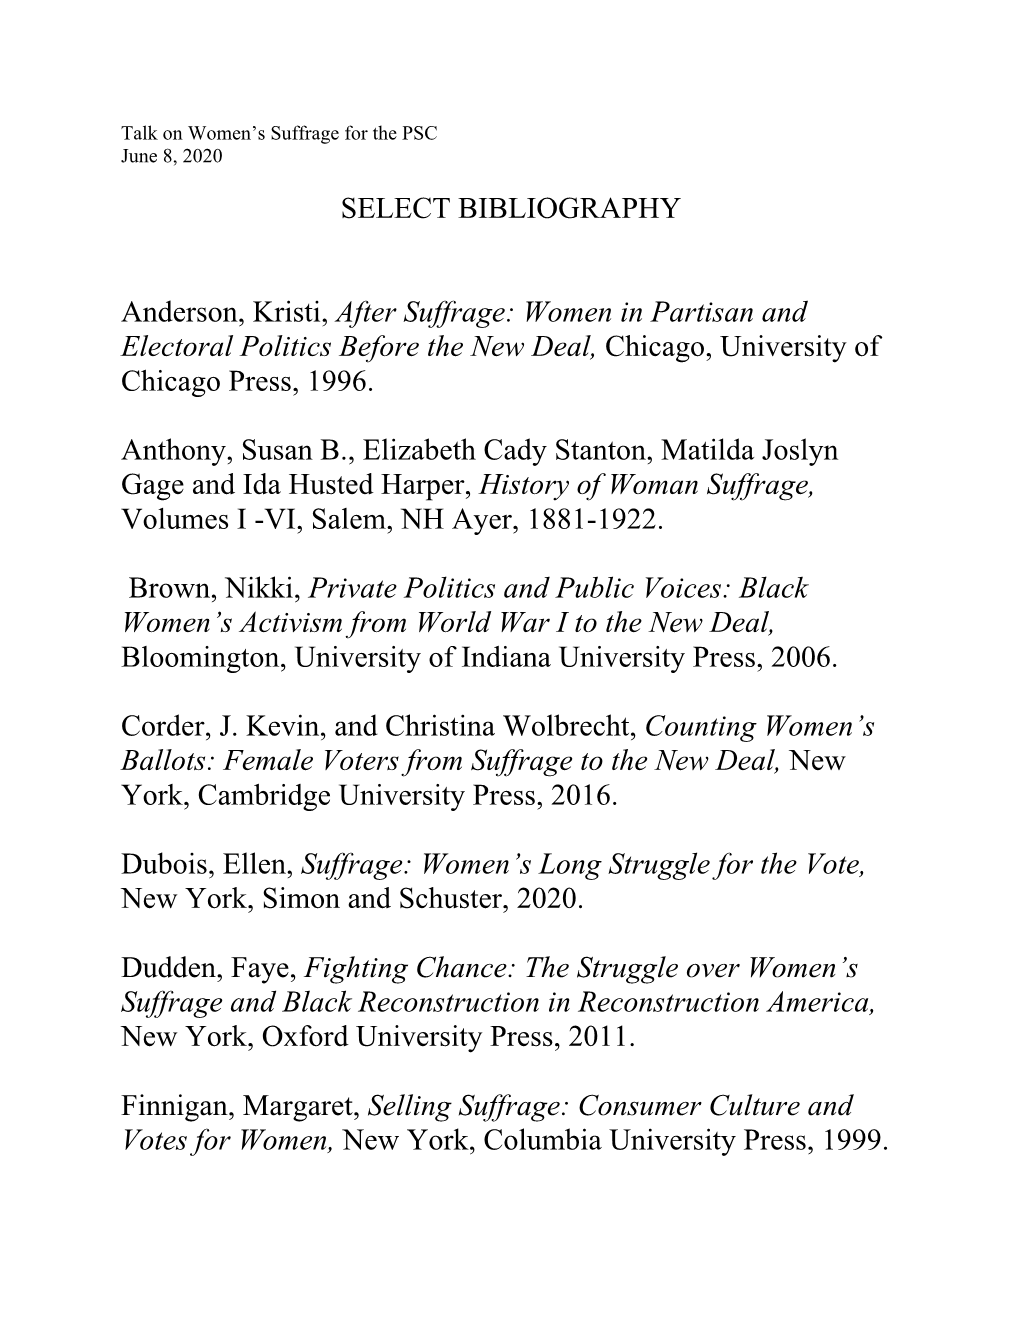 SELECT BIBLIOGRAPHY Anderson, Kristi, After Suffrage